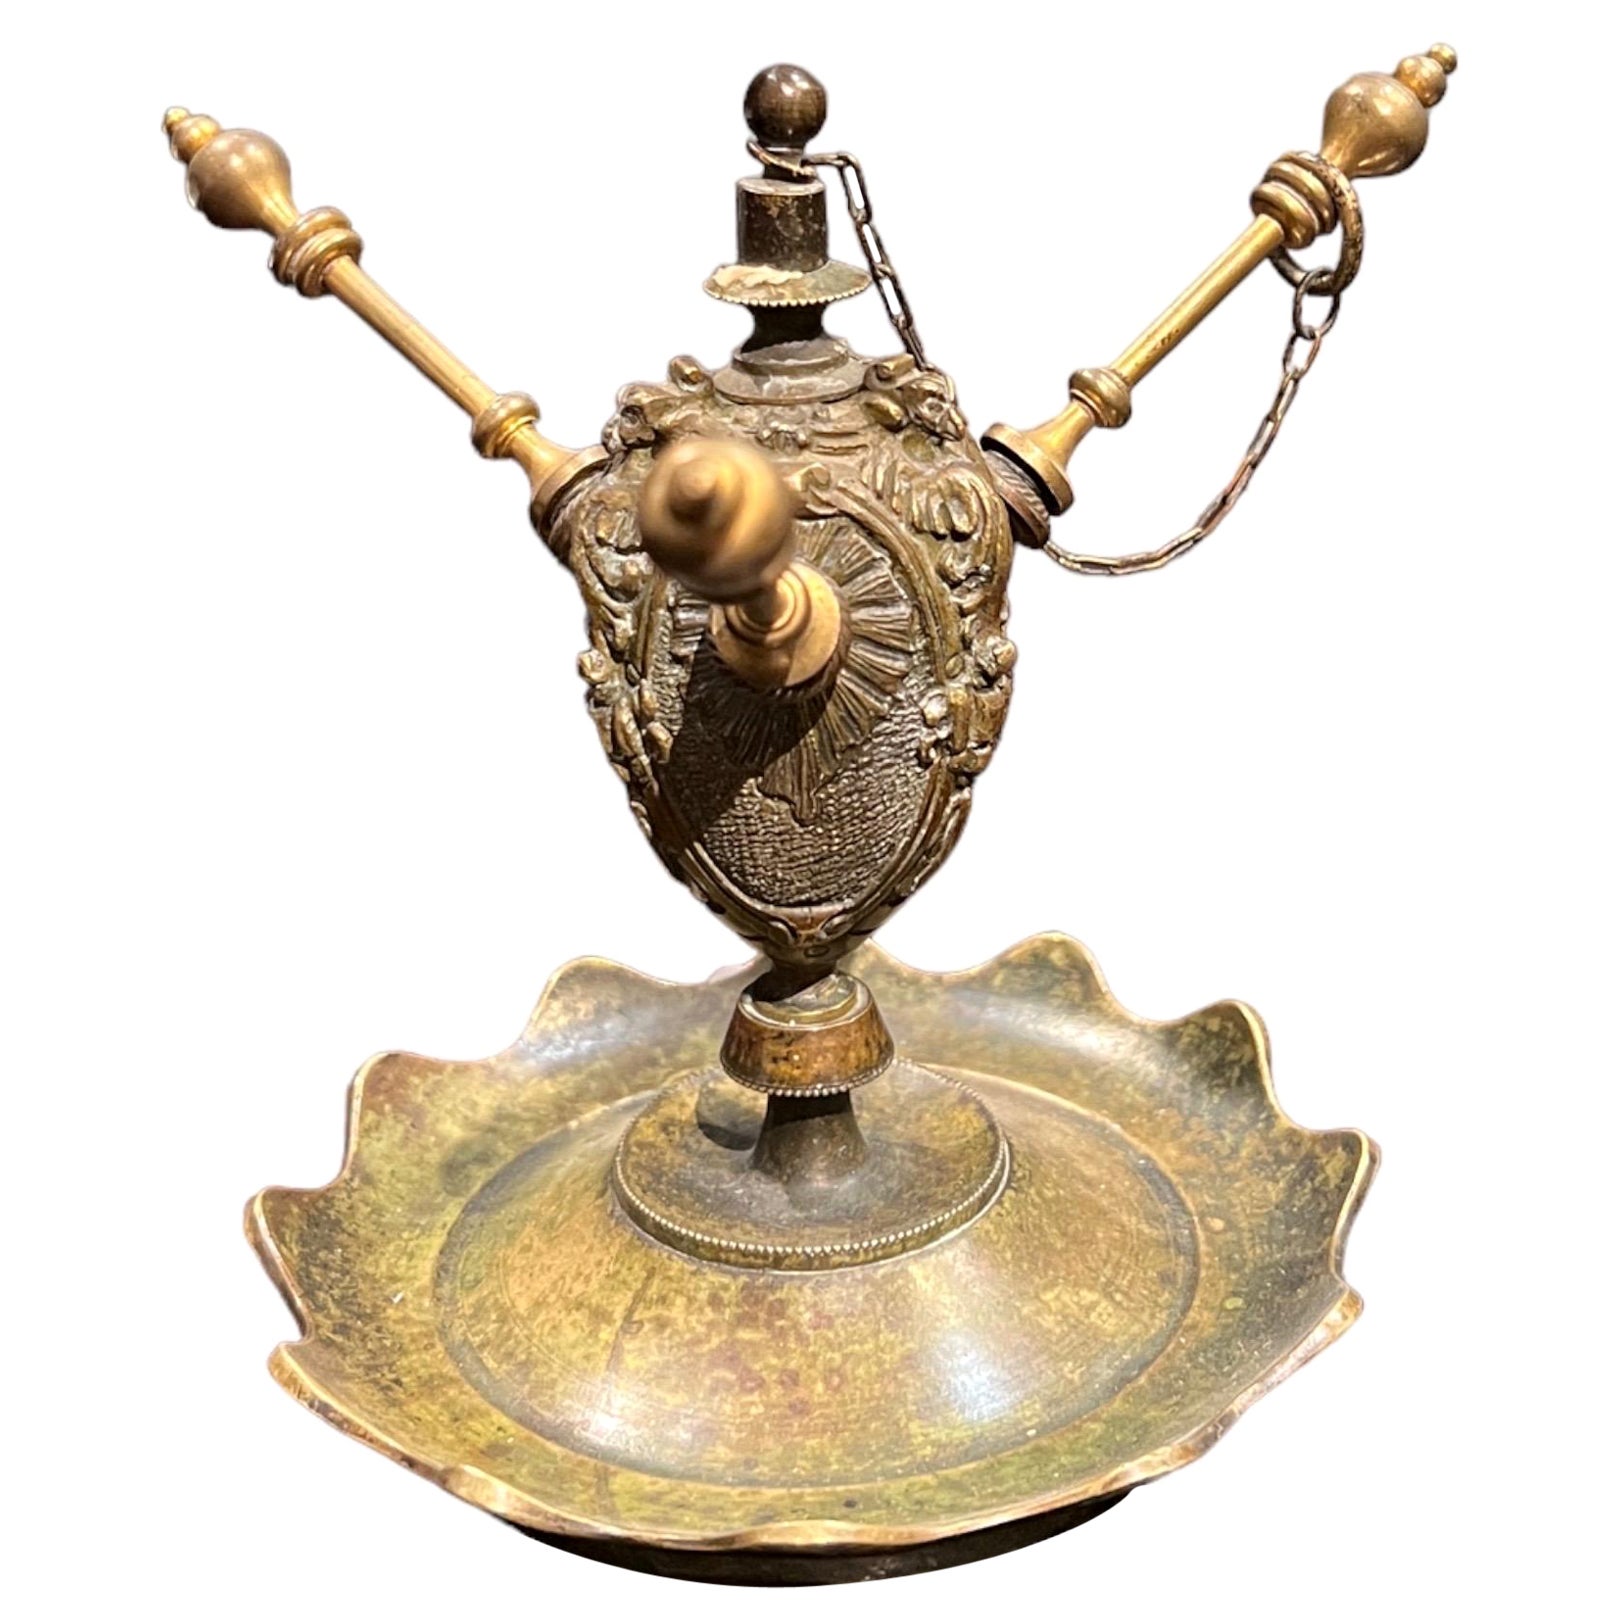 Very Rare Cigars Lighter Lamp for a Smocking Room, France, 19th Century